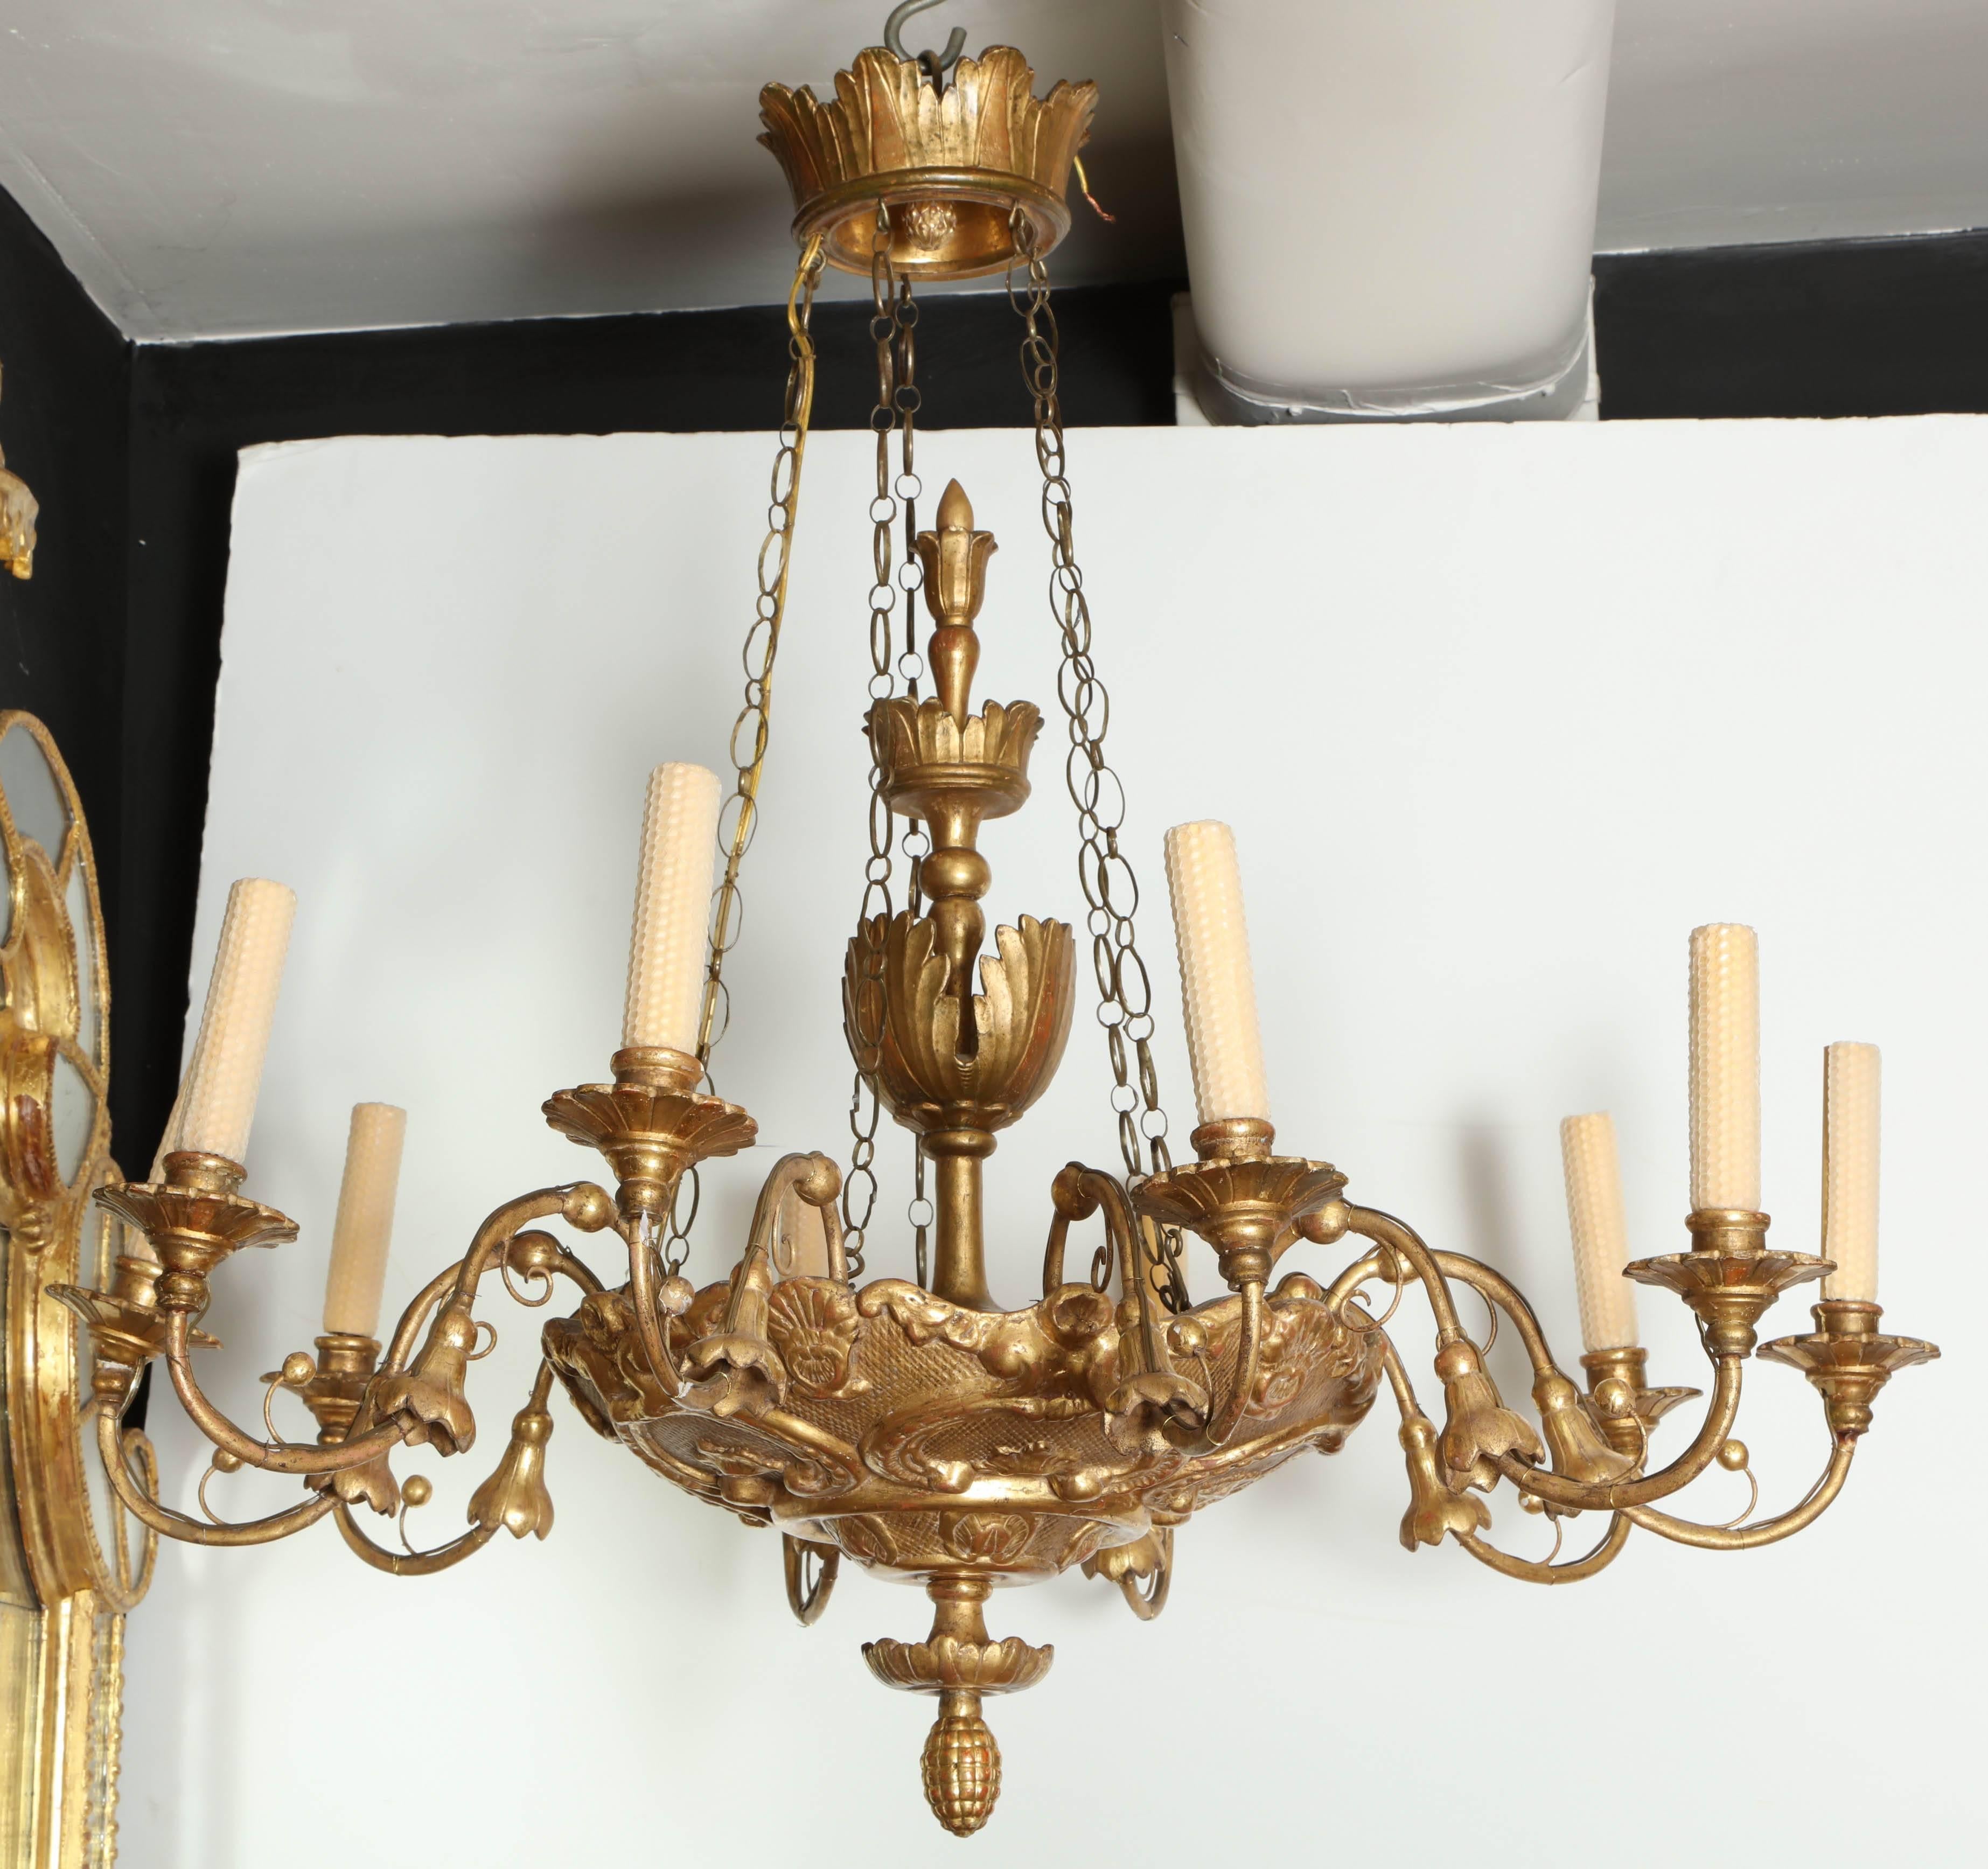 An Italian carved and guilded ten-light chandelier with crown.